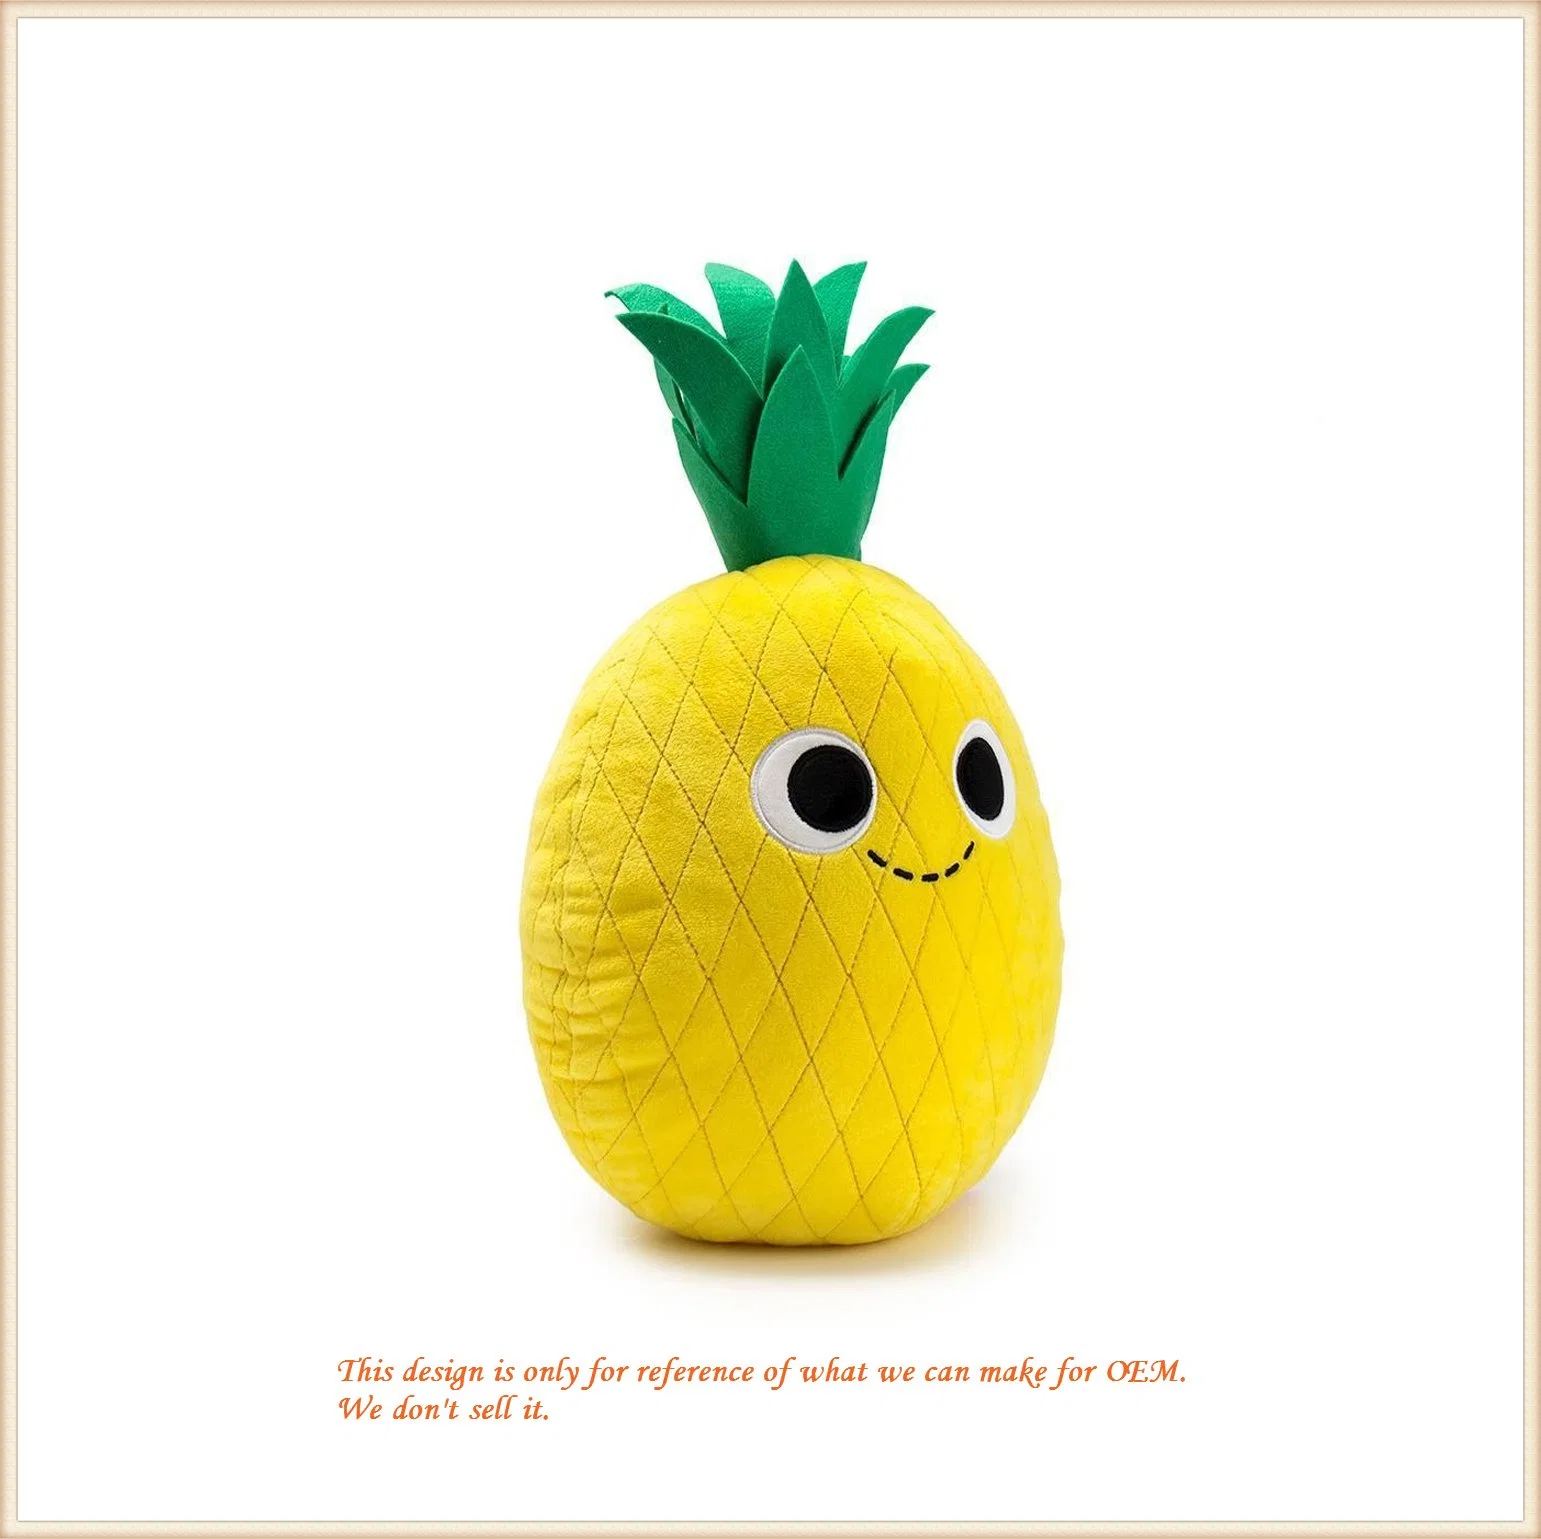 Soft Toys of Pear Pillow/ Pear Cushion for Baby Cuddly Toys/ Fruit Plush Toys of OEM/ Custom Toys